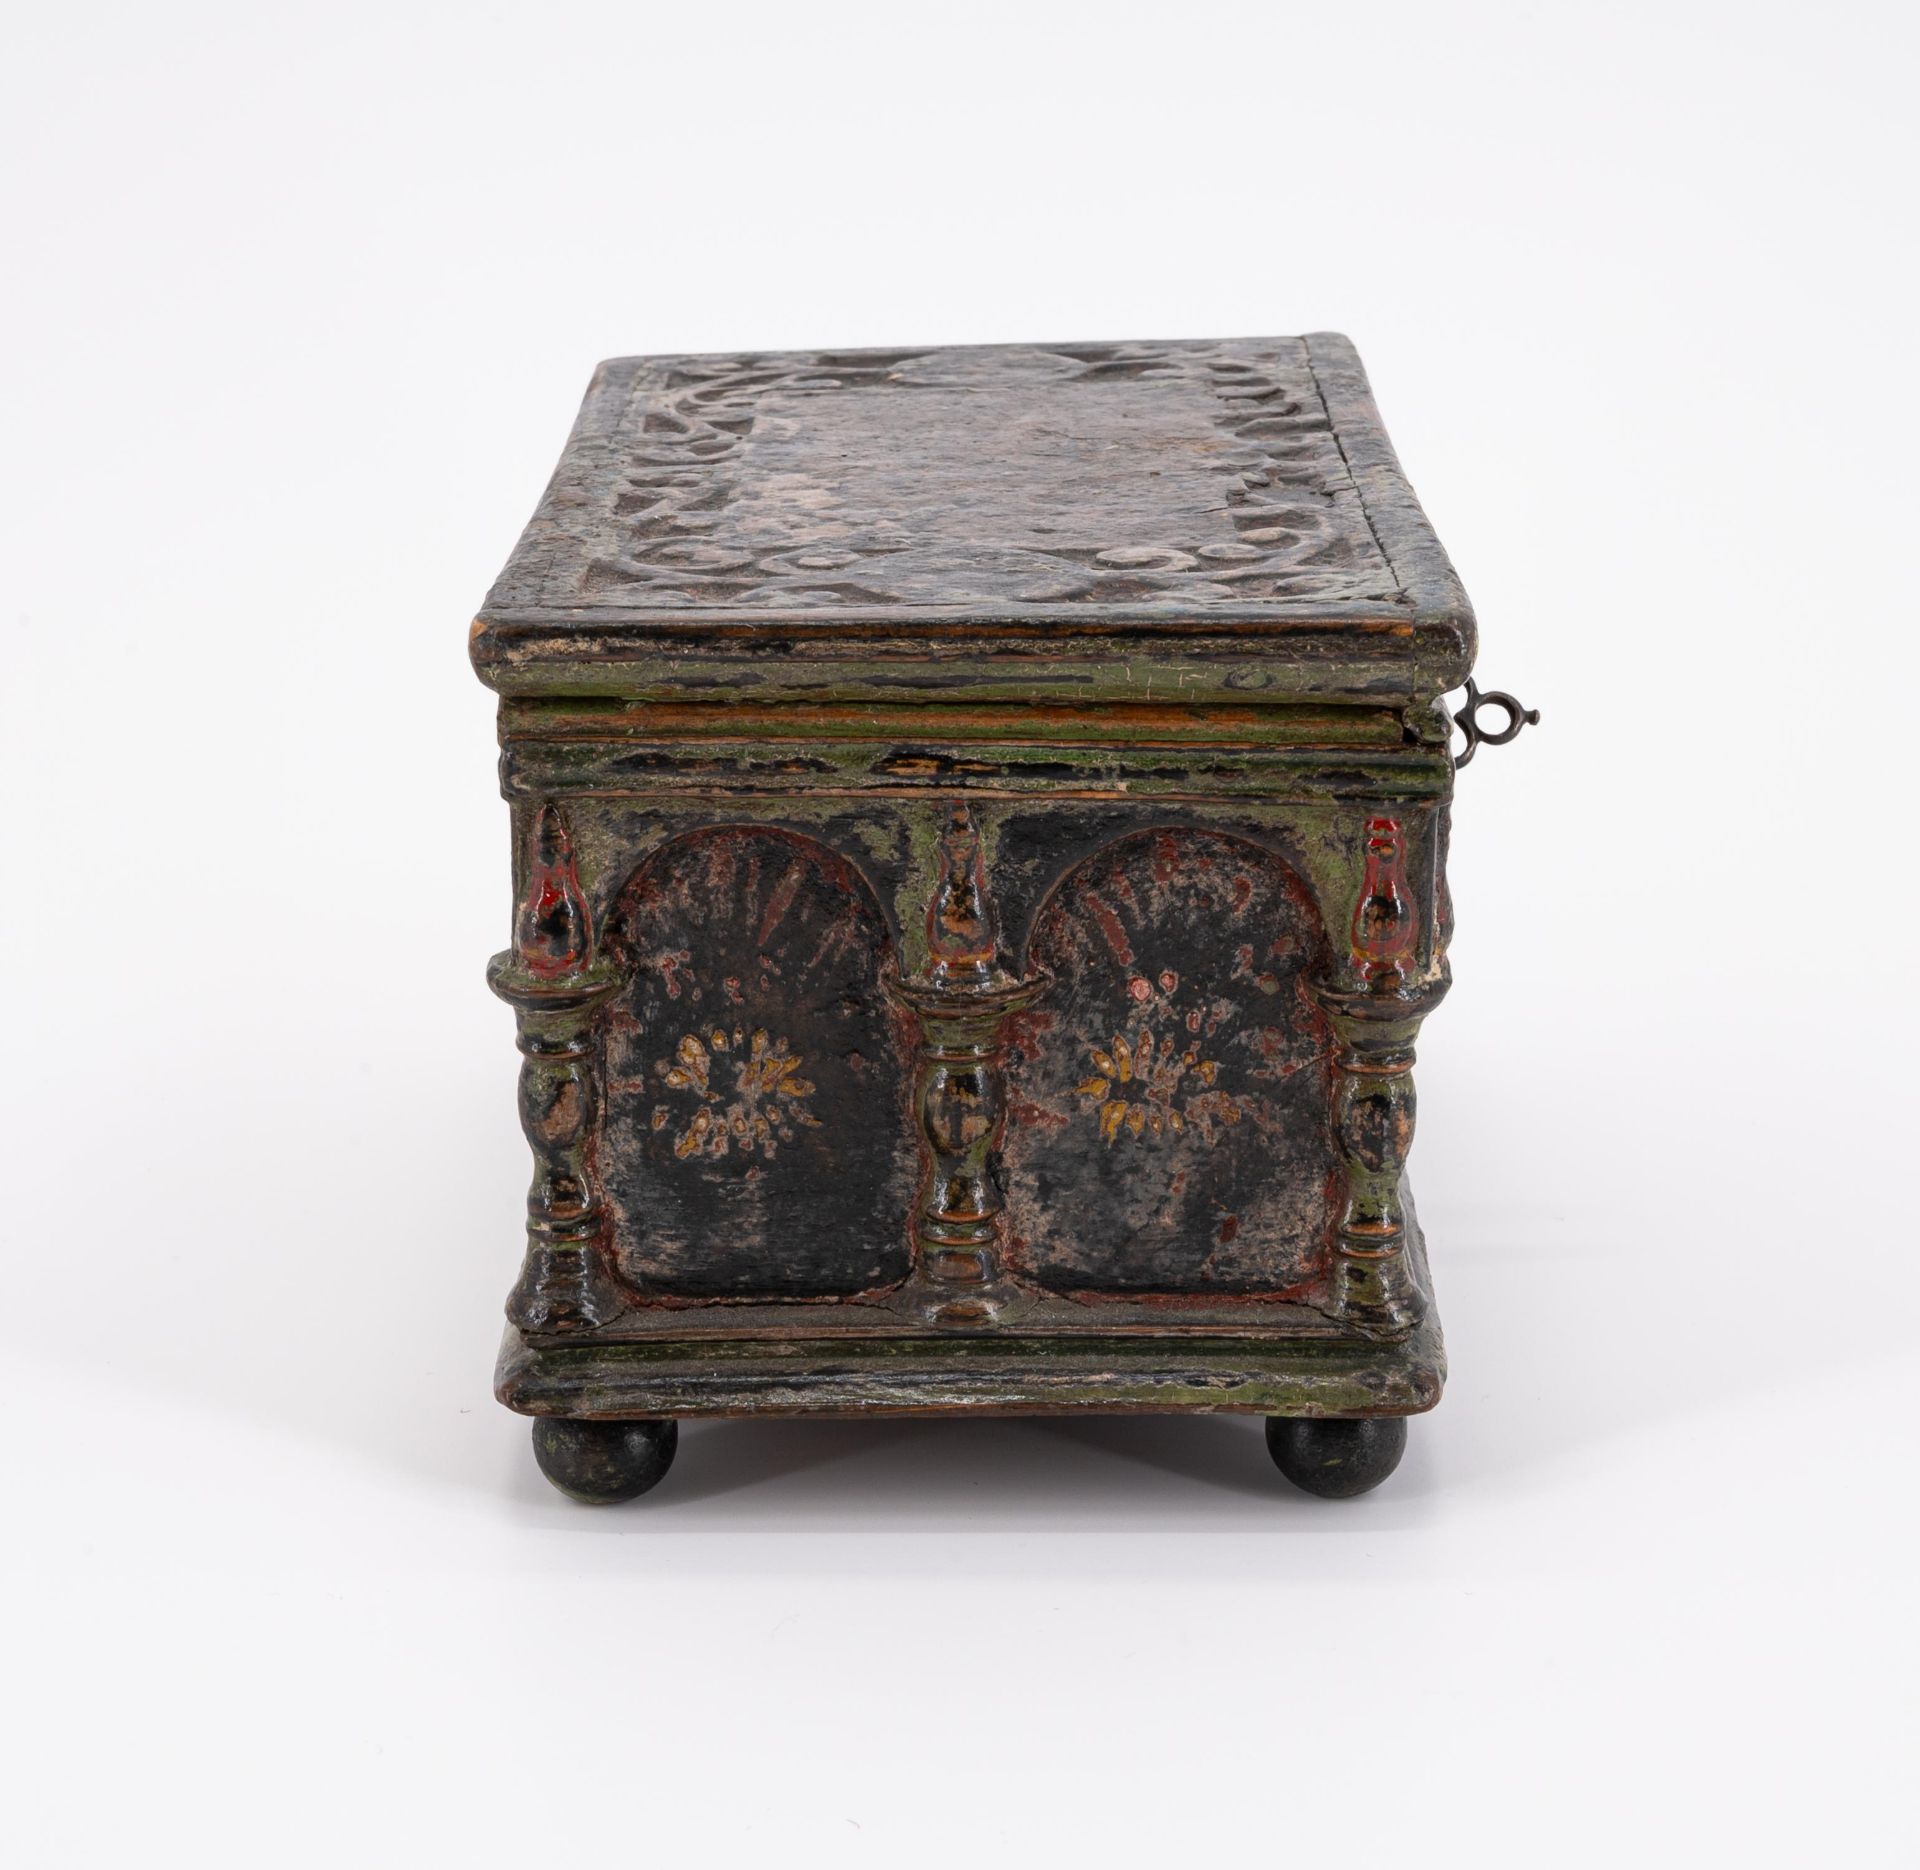 MINIATURE BEECH WOOD CHEST - Image 4 of 7